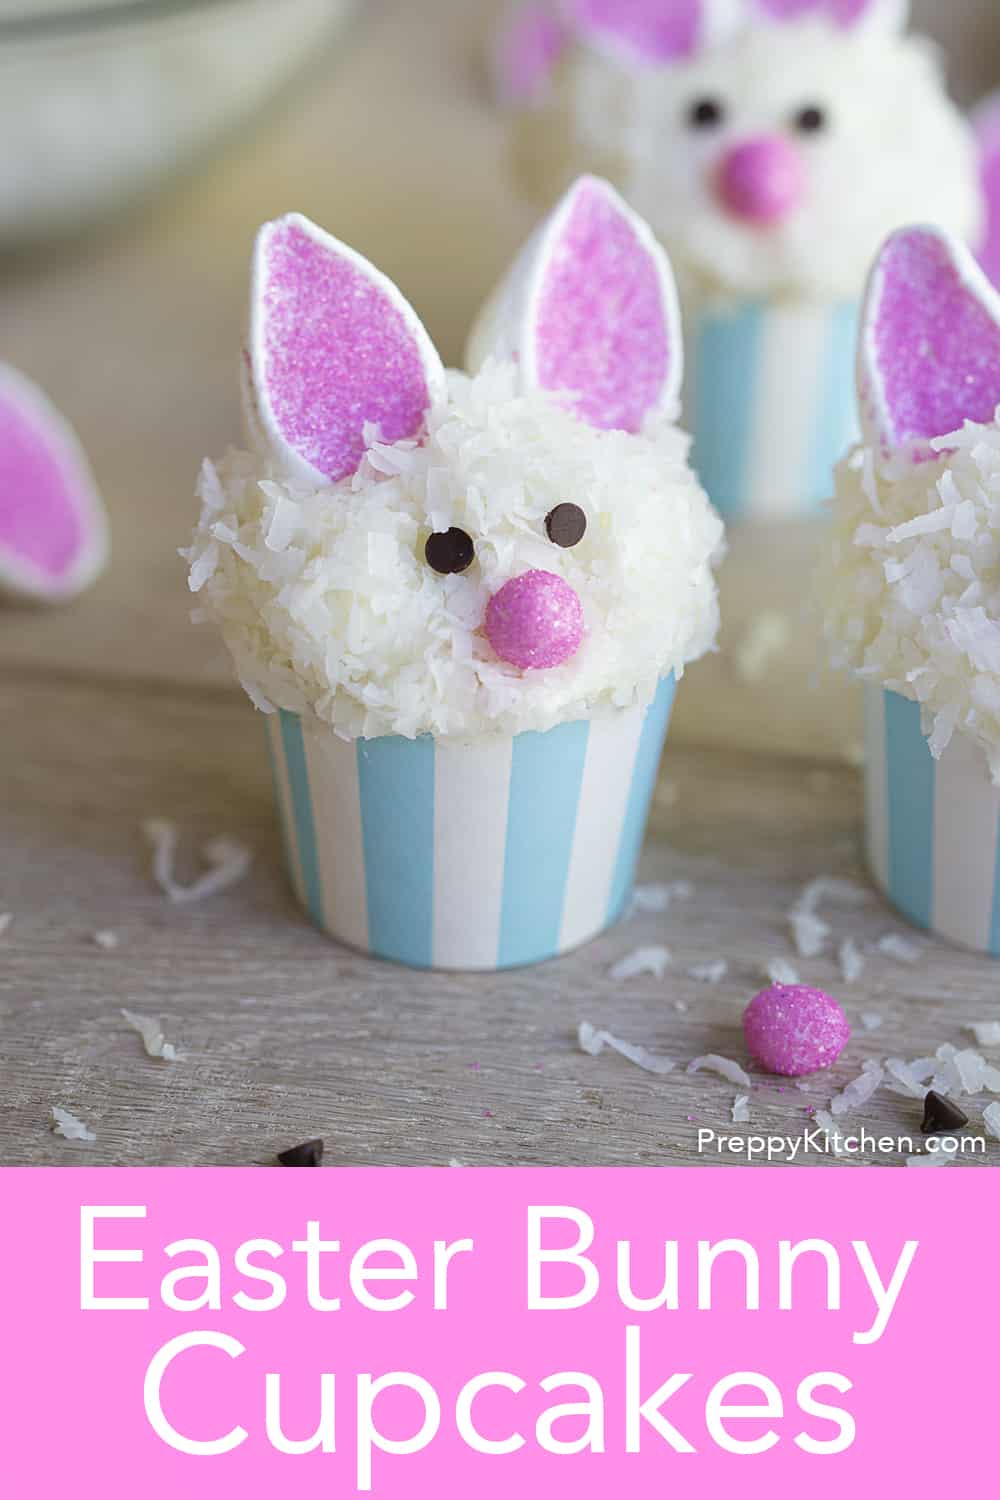 Easter Bunny Cupcakes - Preppy Kitchen